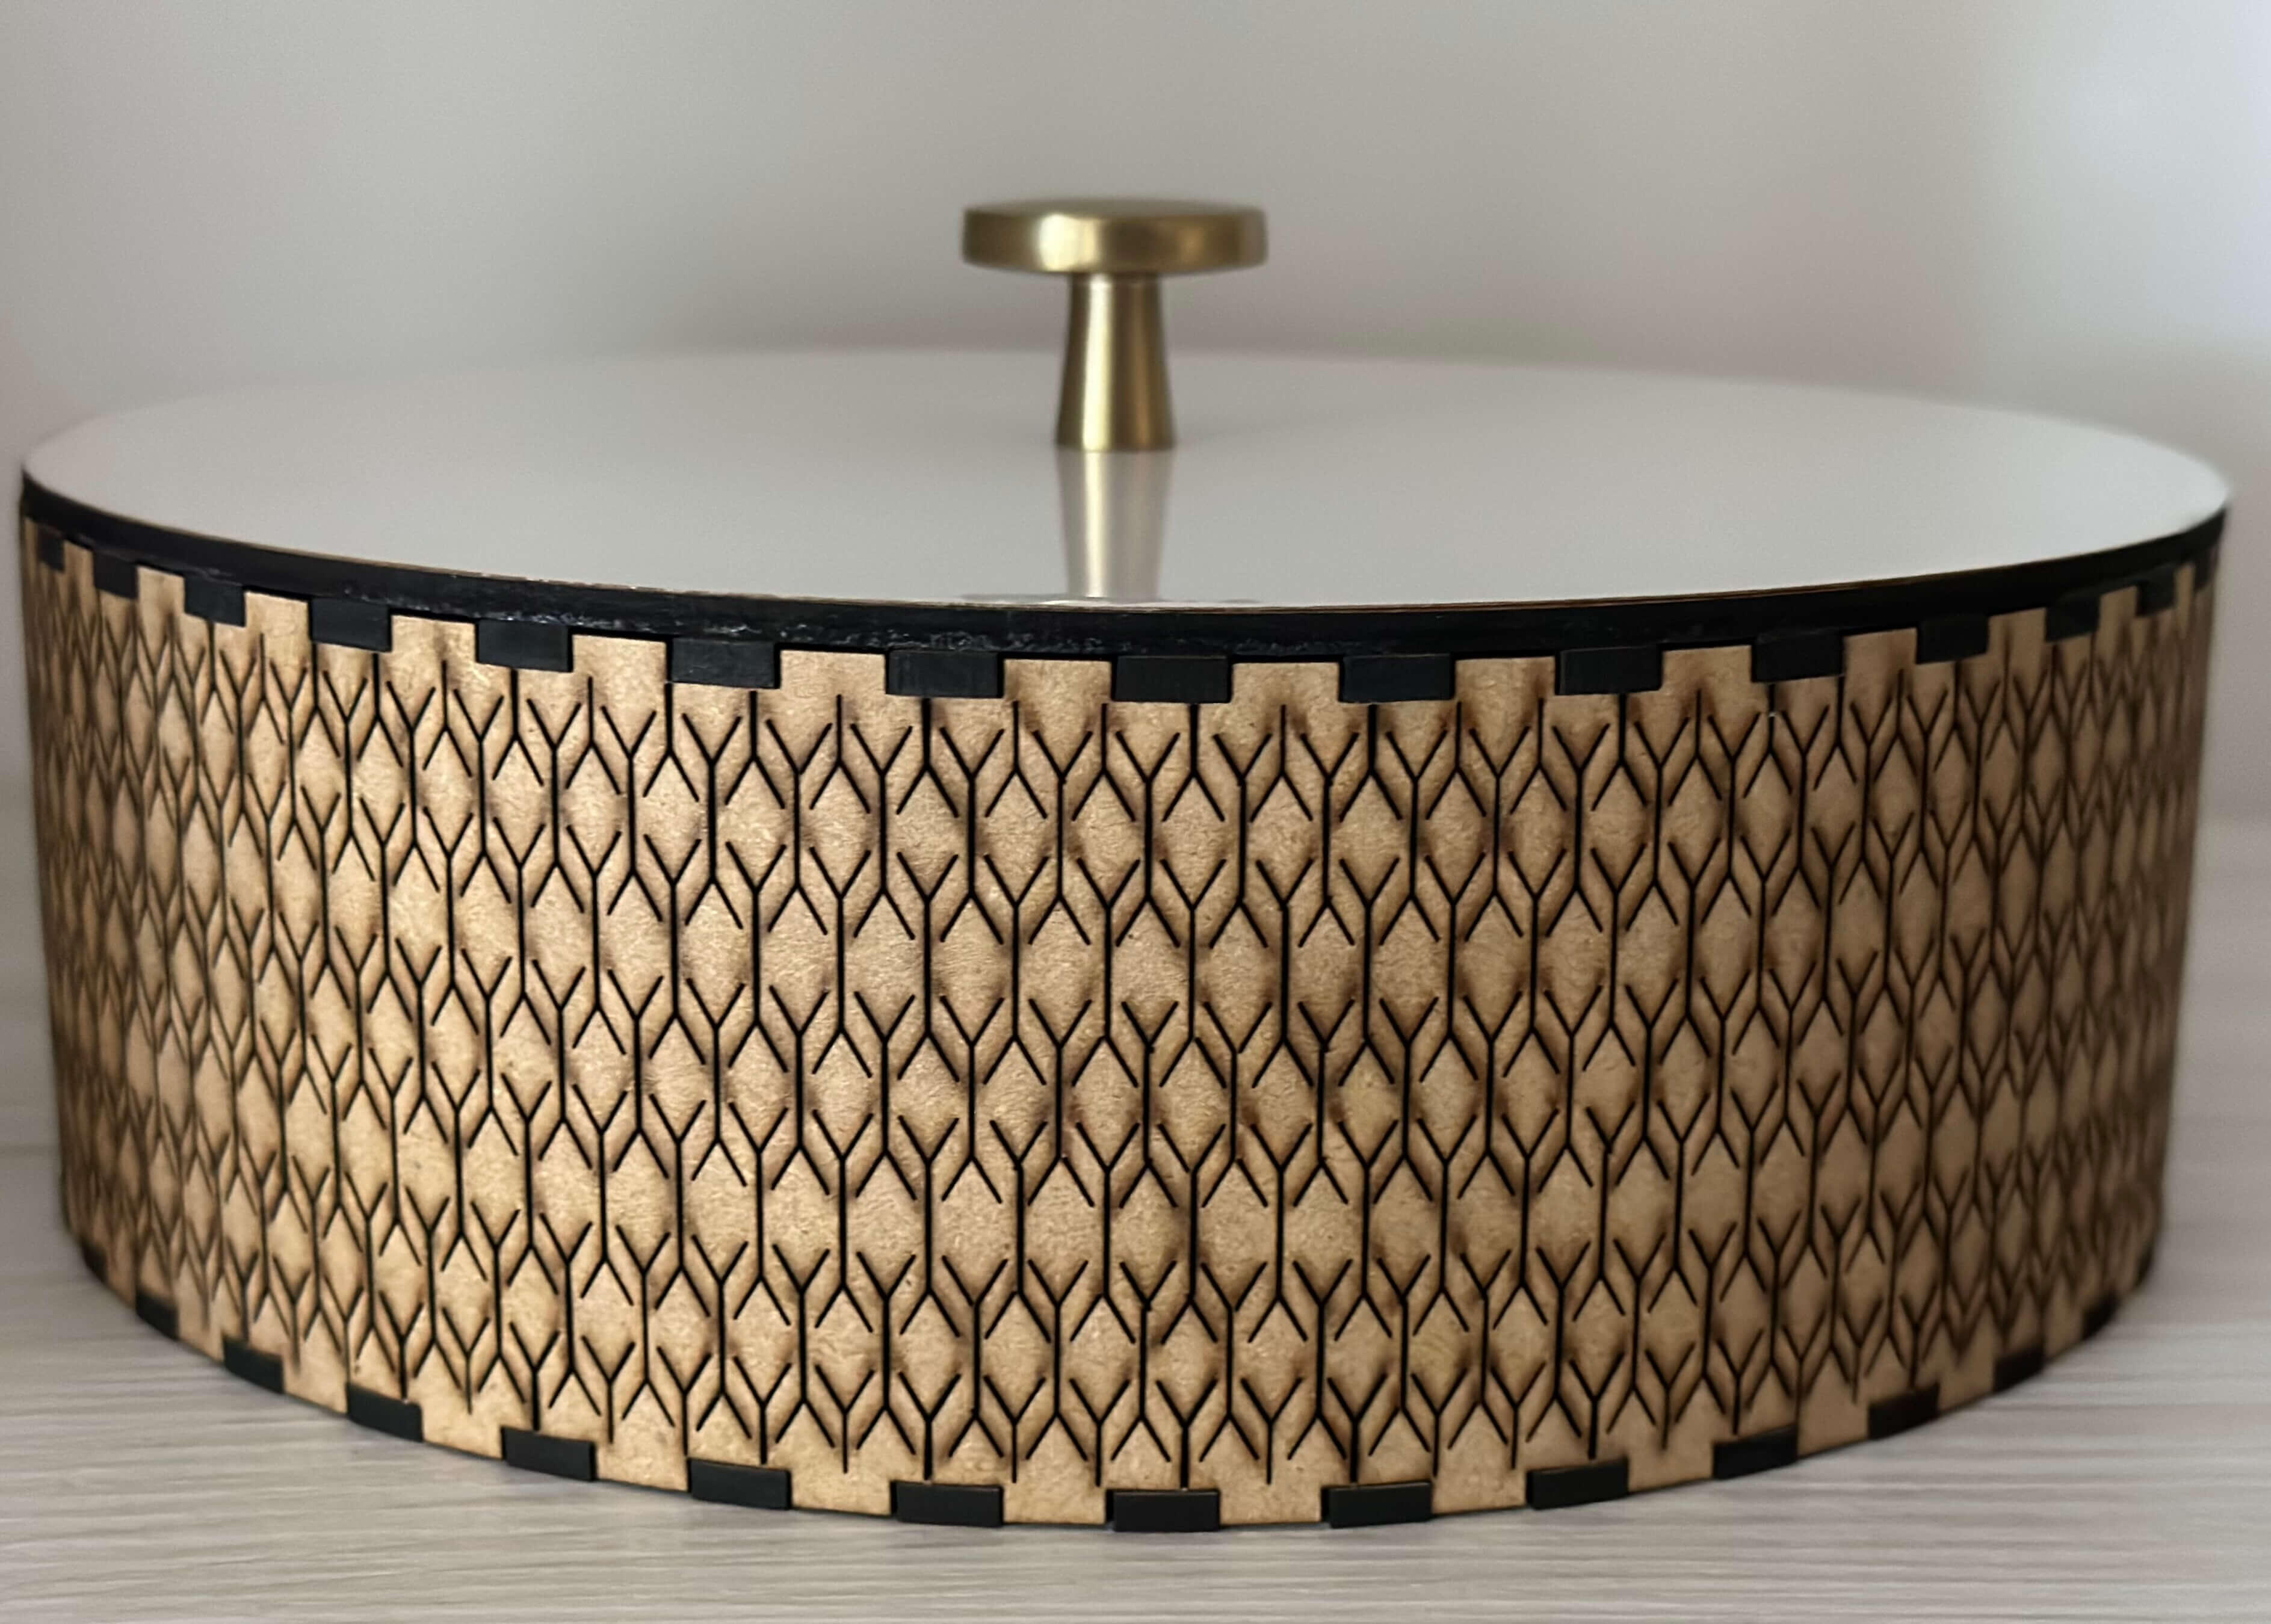 Pearl White, Tortilla Warmer with Gold hardware